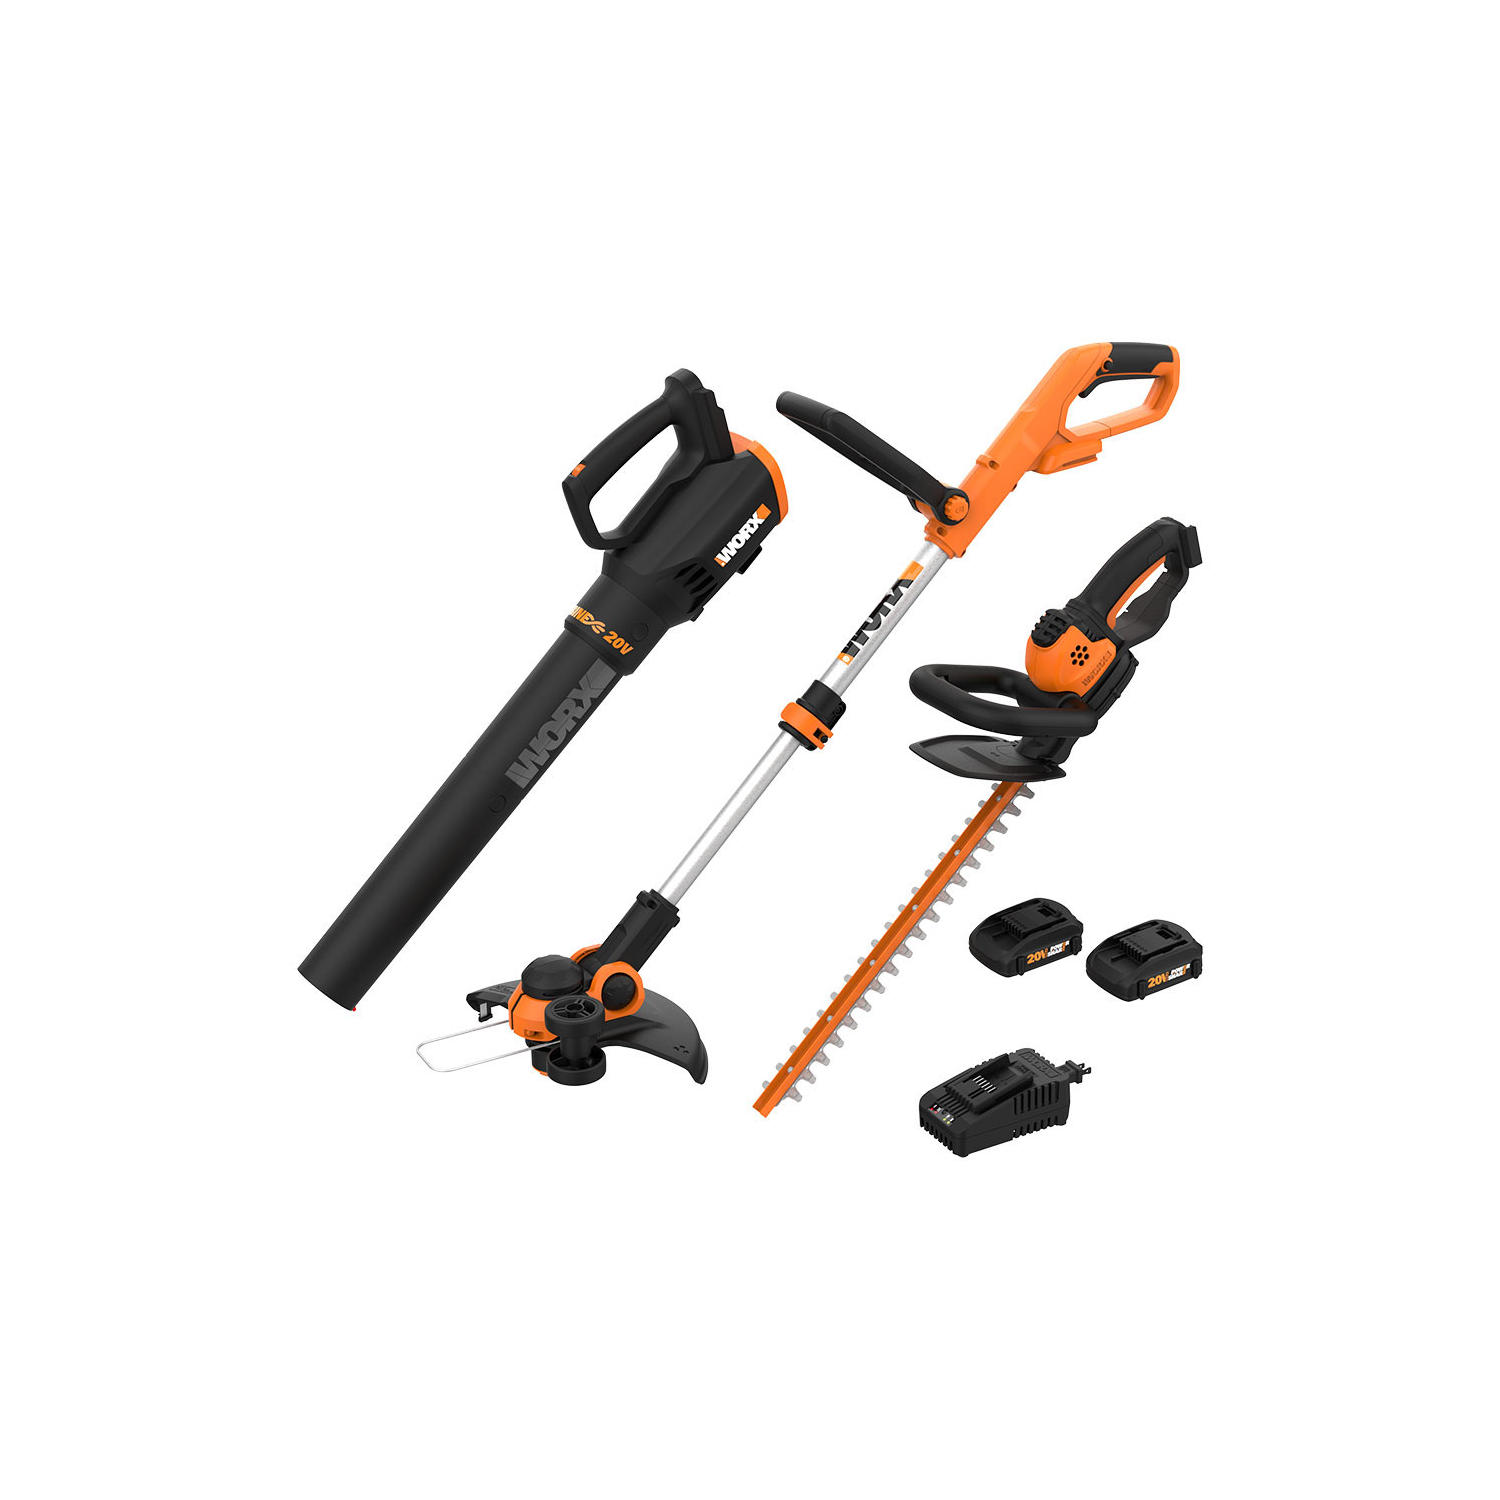 Worx WG933 20V Power Share 3-Piece Cordless Combo Kit (Blower, Trimmer, and Hedge Trimmer)